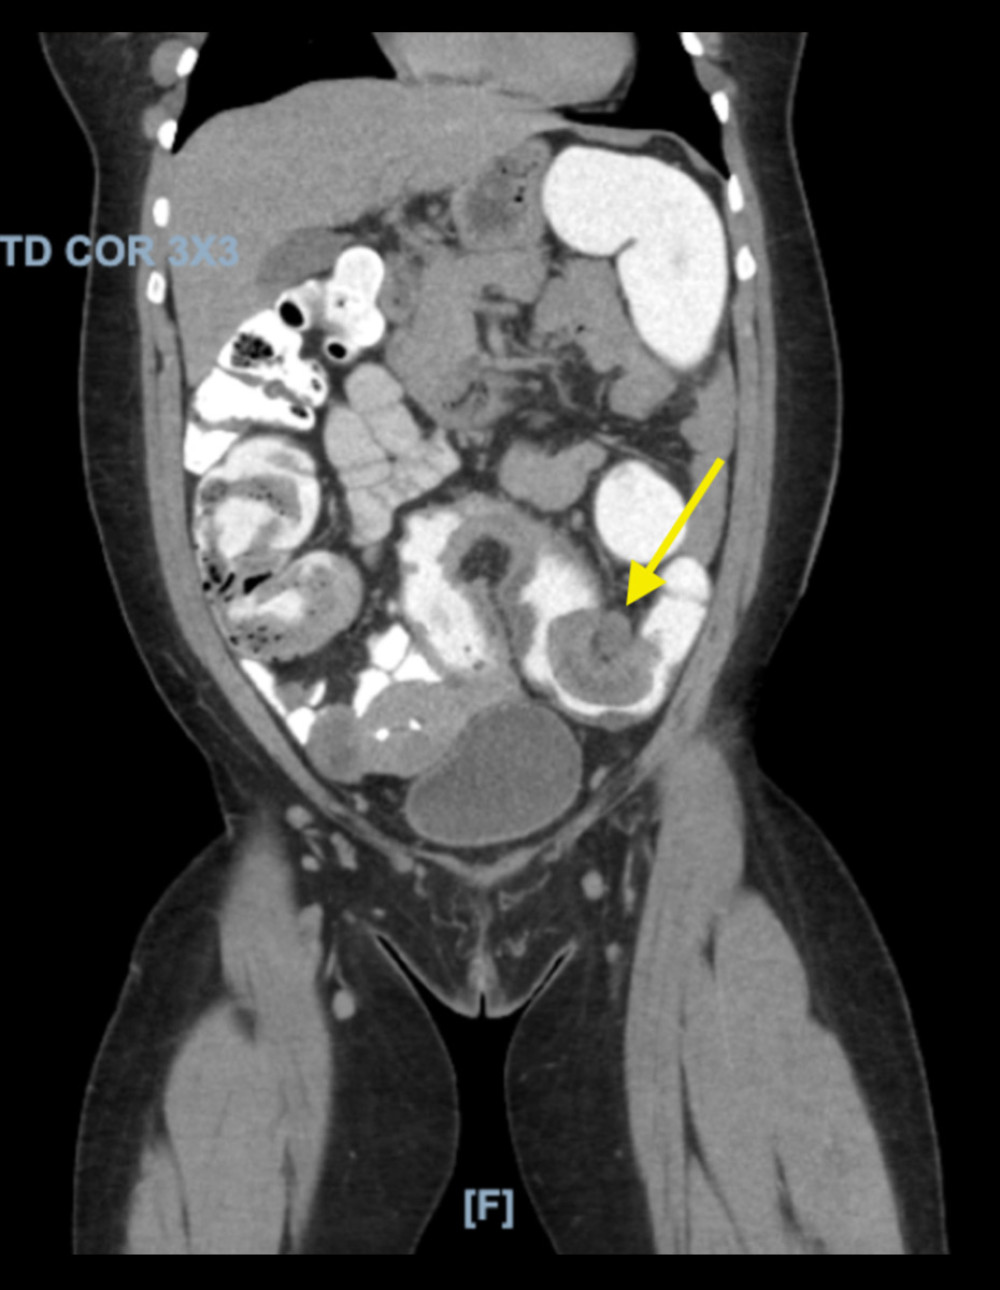 Computed tomography of the abdomen and pelvis with intravenous, oral, and rectal contrast showing reduction of intussusception and an arrow pointing to the intra-luminal mass within the sigmoid colon.